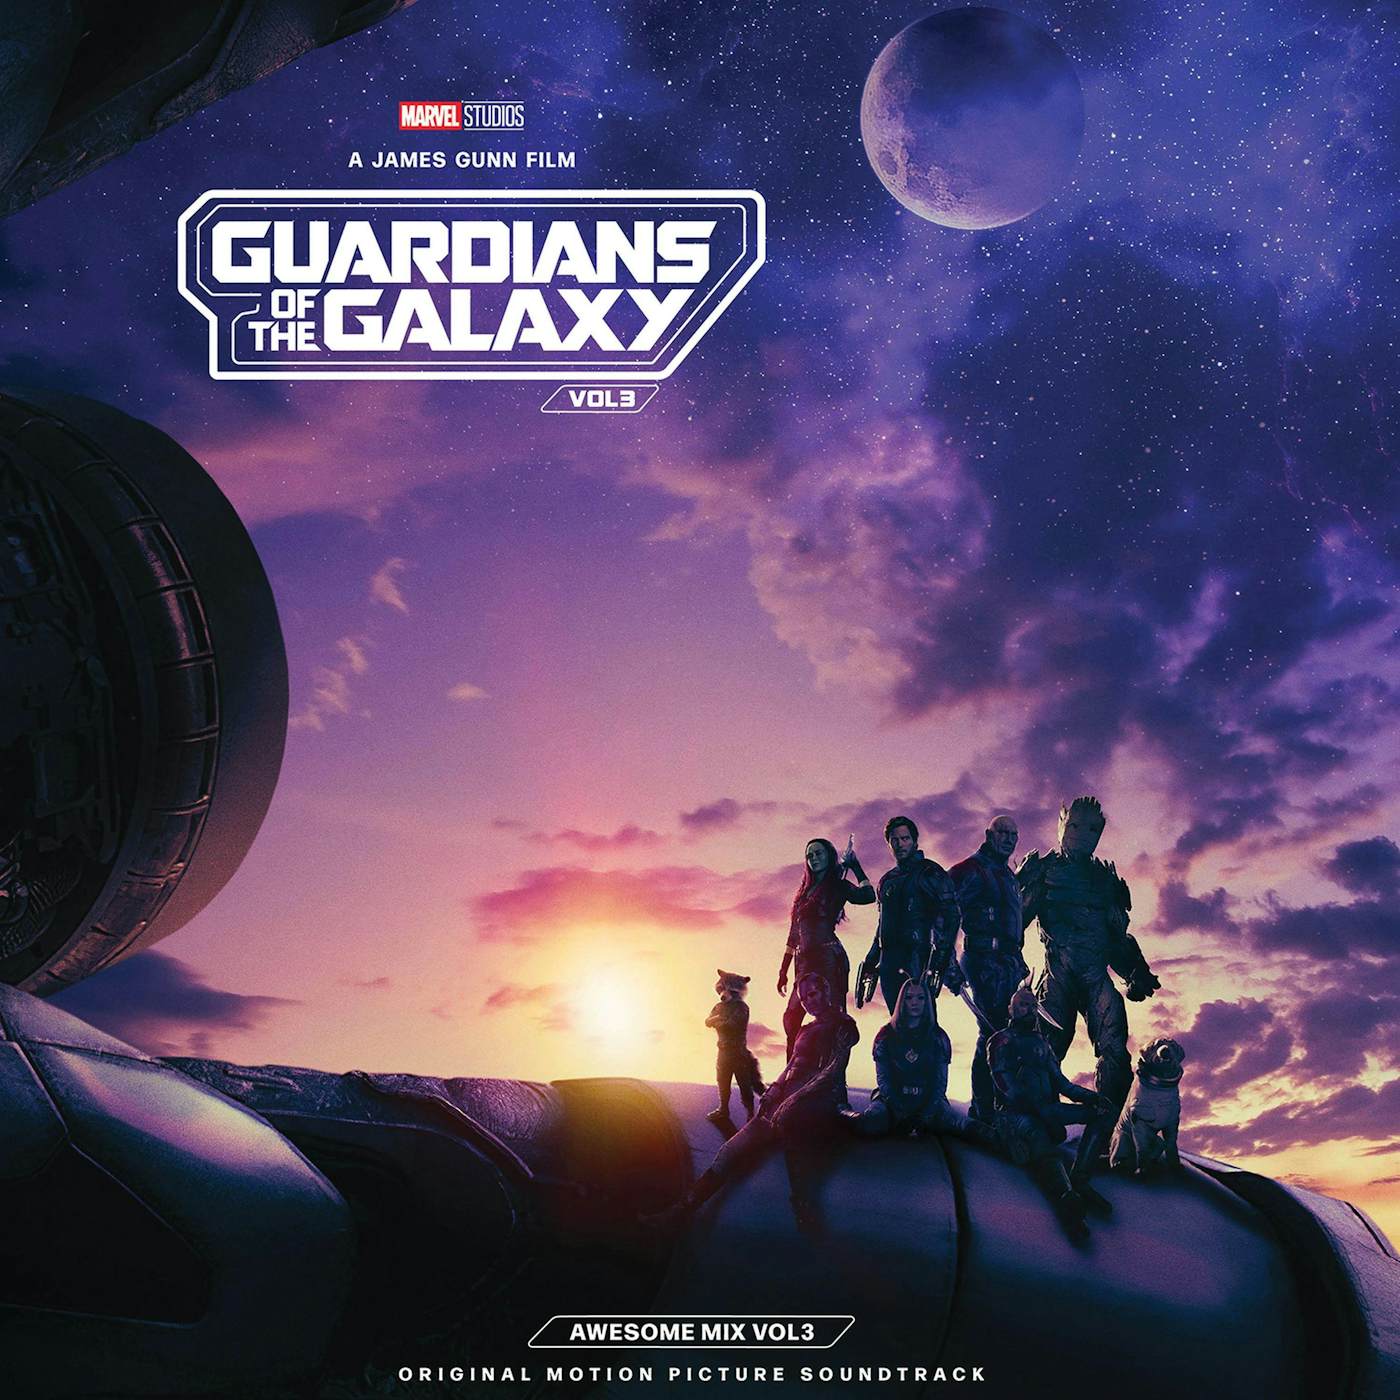 Guardians Of The Galaxy 3: Awesome Mix Vol 3 / Var Guardians Of The Galaxy Vol. 3: Awesome Mix Vol. 3 (2LP) Vinyl Record